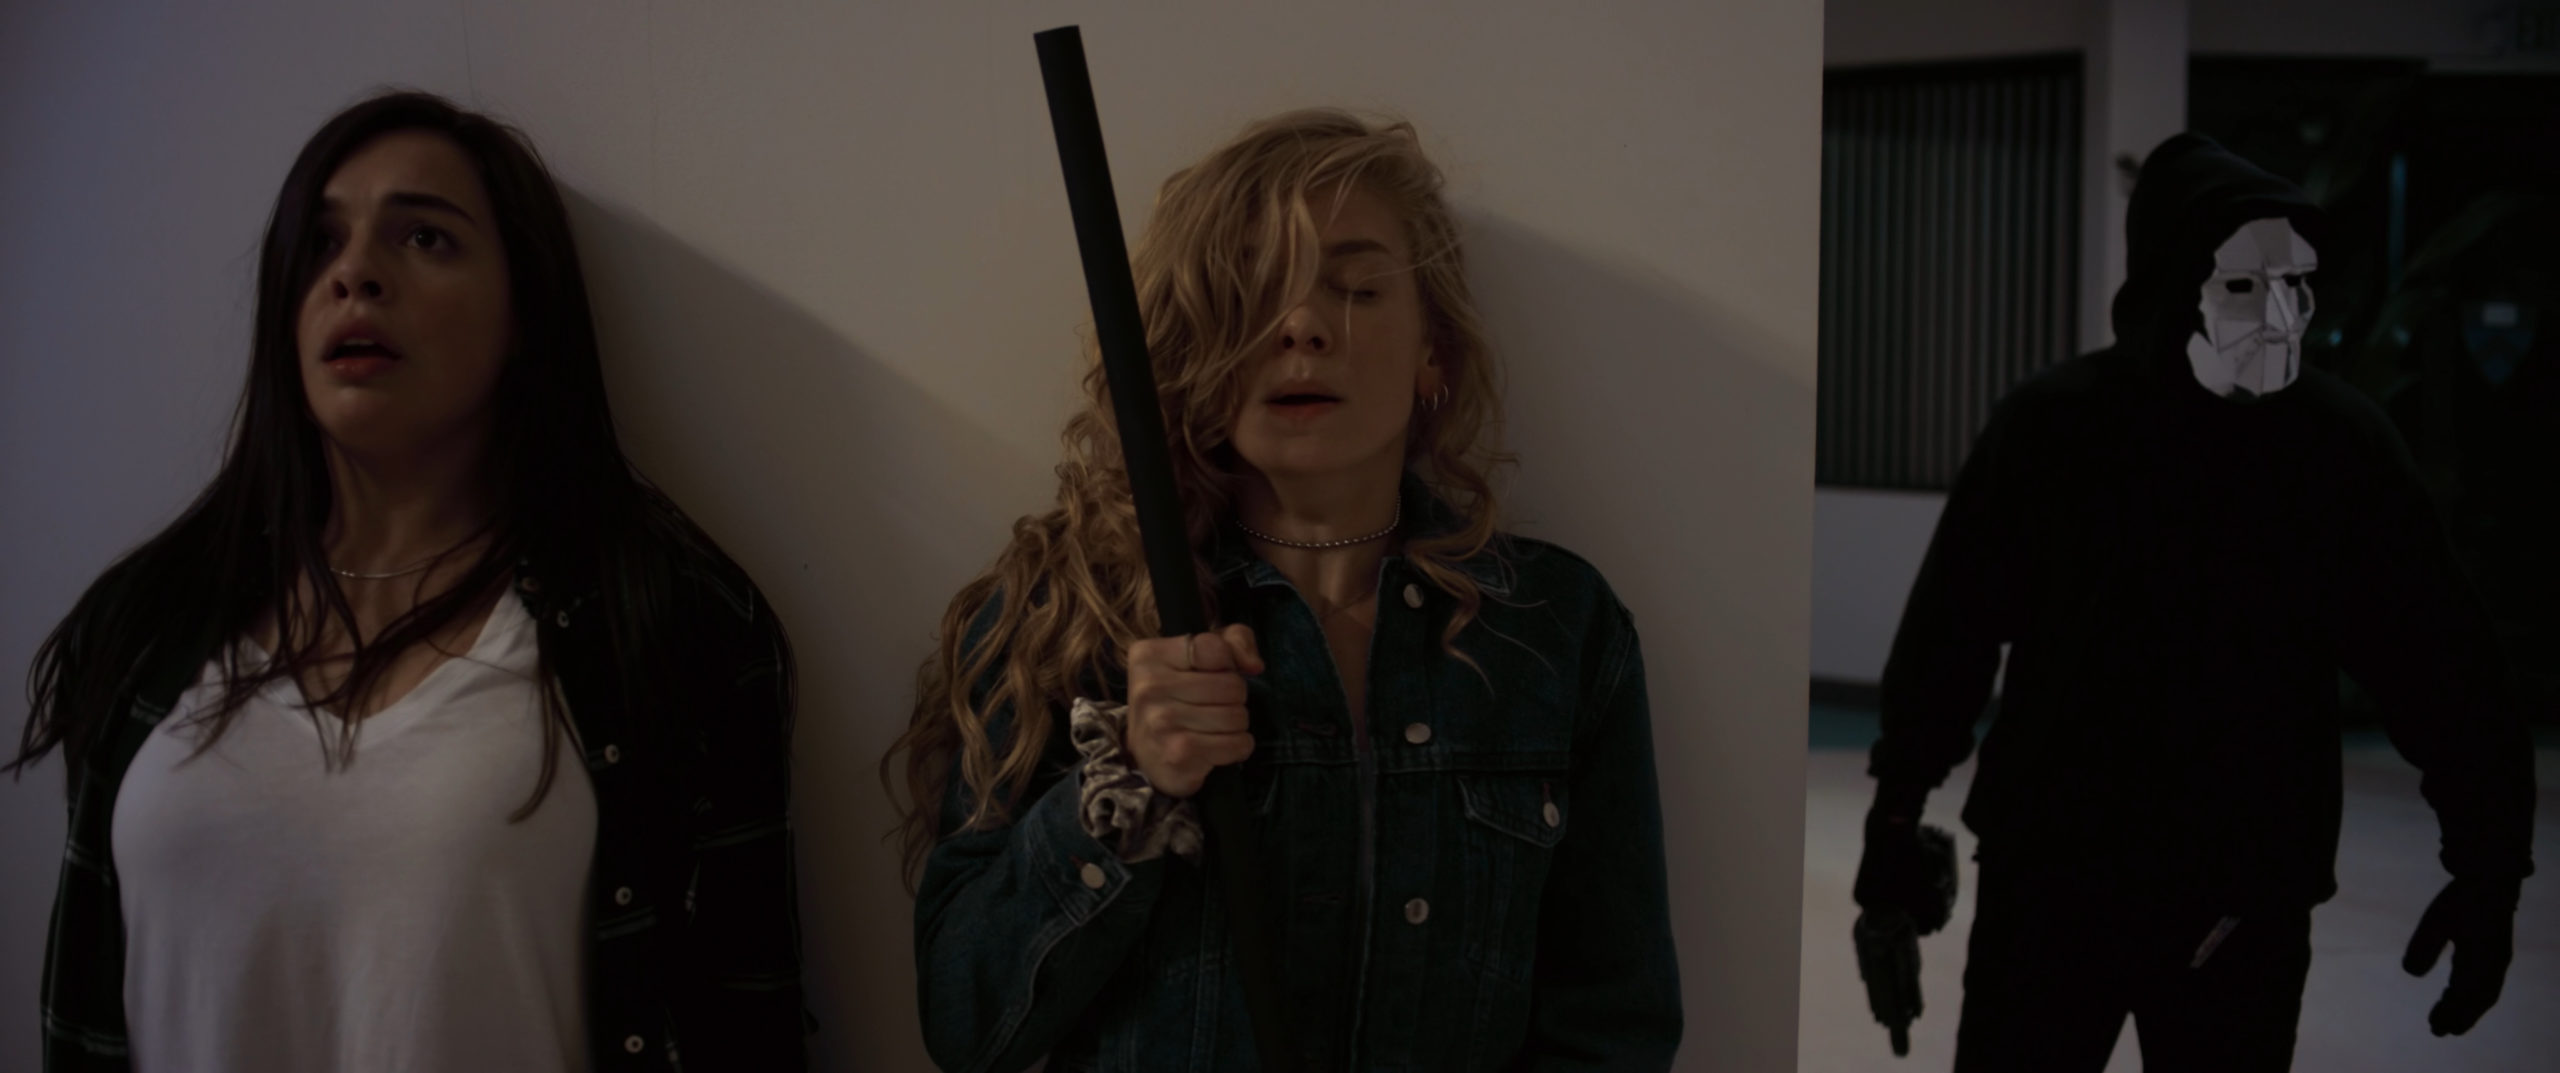 Lindsay LaVanchy on Her First Lead Role In Slasher Thriller Initiation [Exclusive Interview]